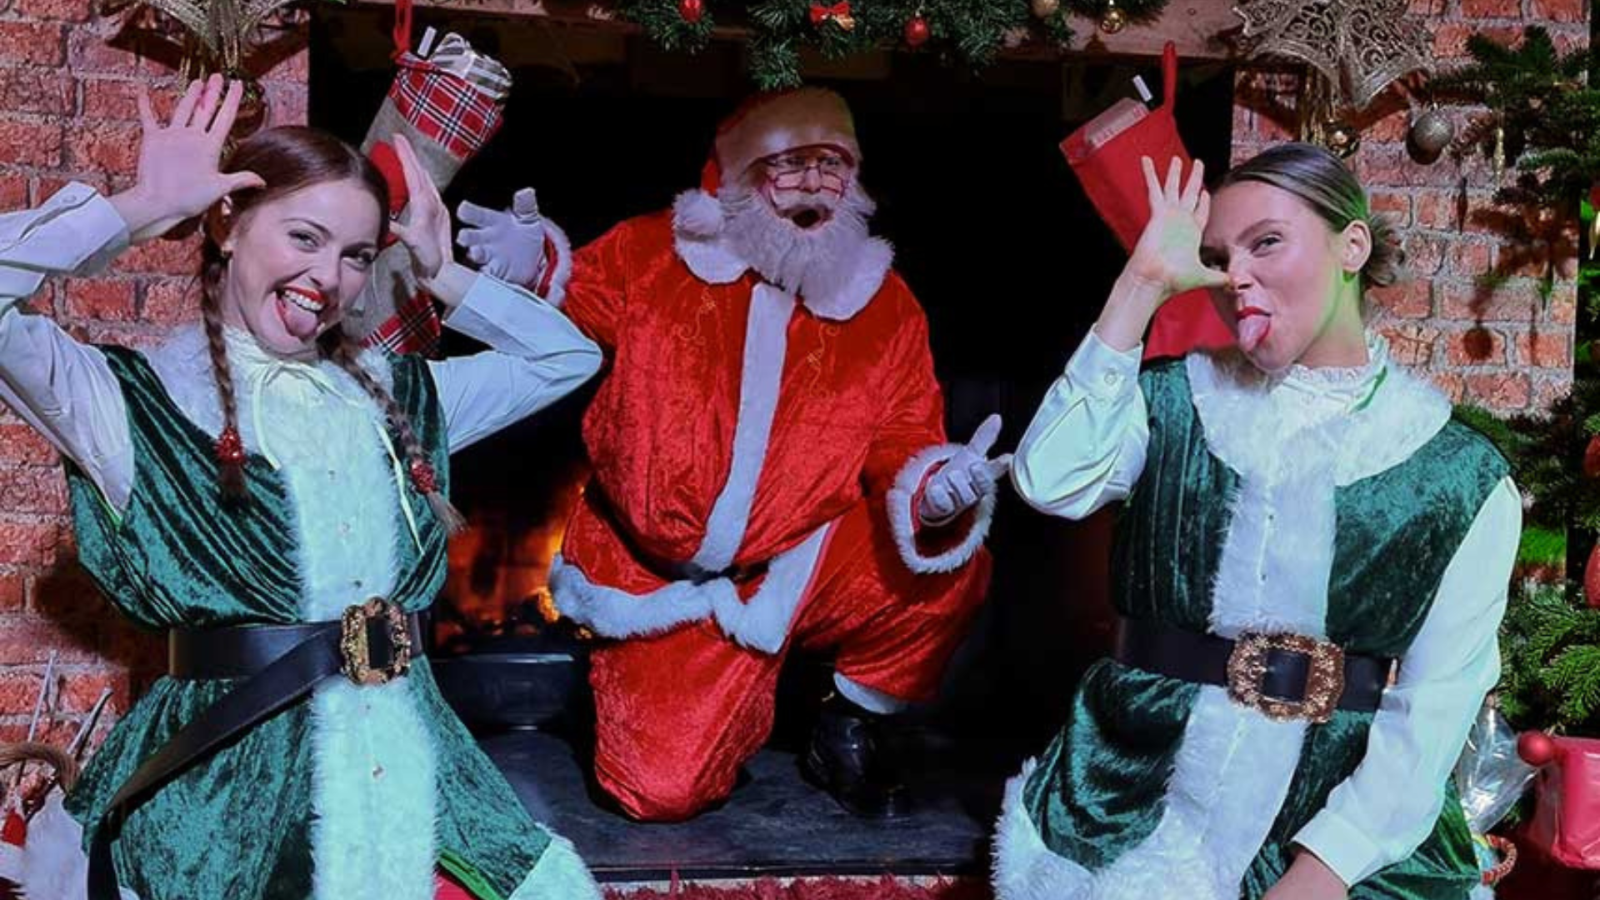 Two elves with Santa